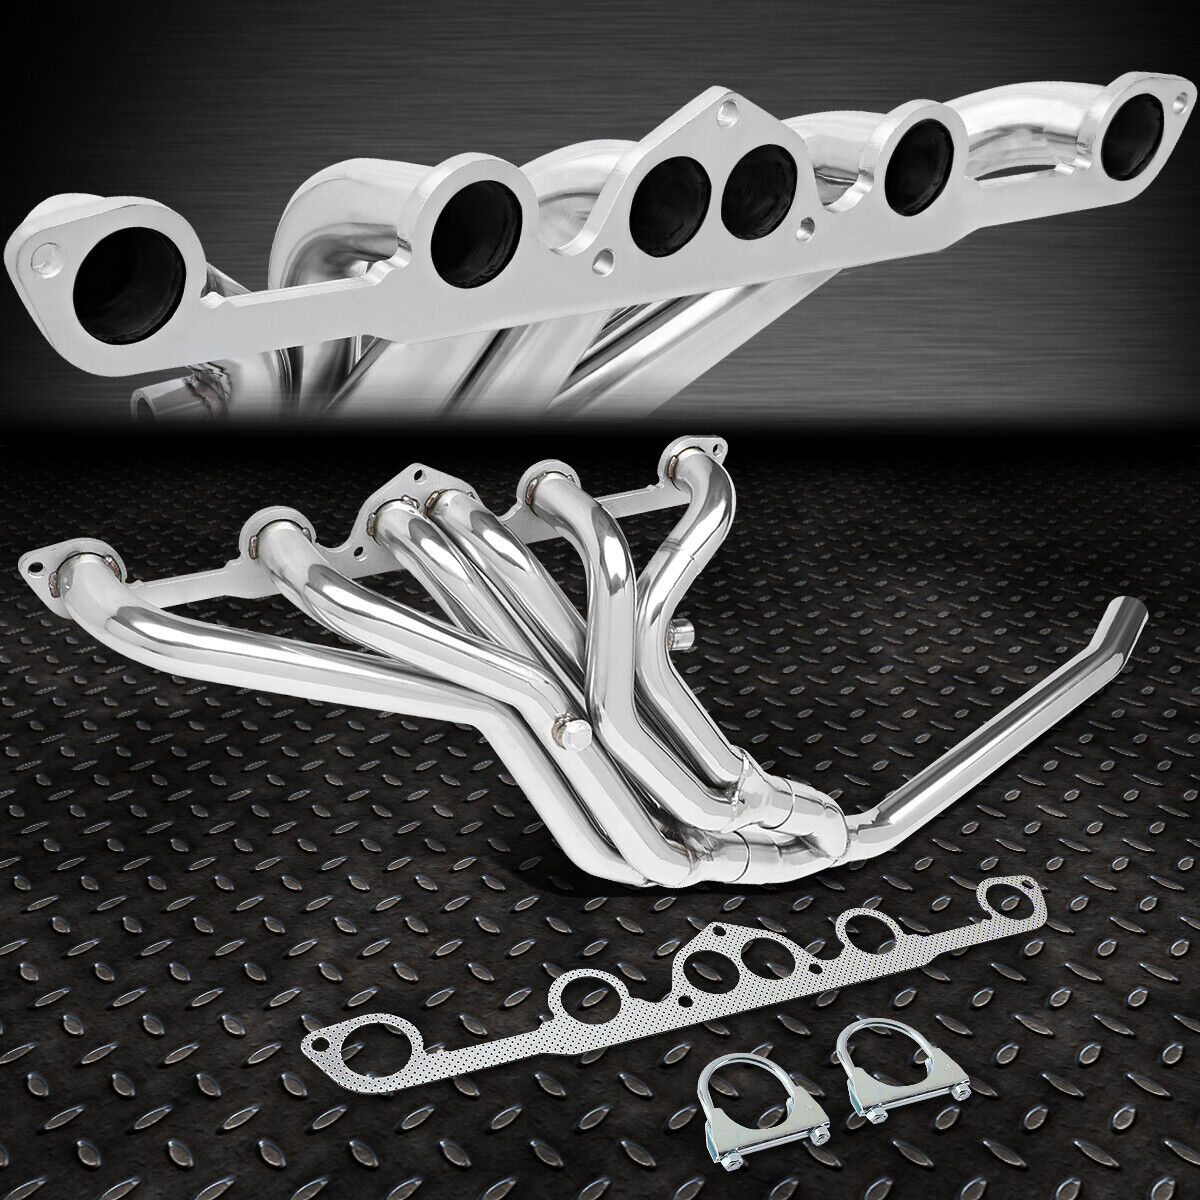 FOR 77- 83 DATSUN 280Z/280ZX 2.8L NON TURBO MID LENGTH EXHAUST HEADER MANIFOLD